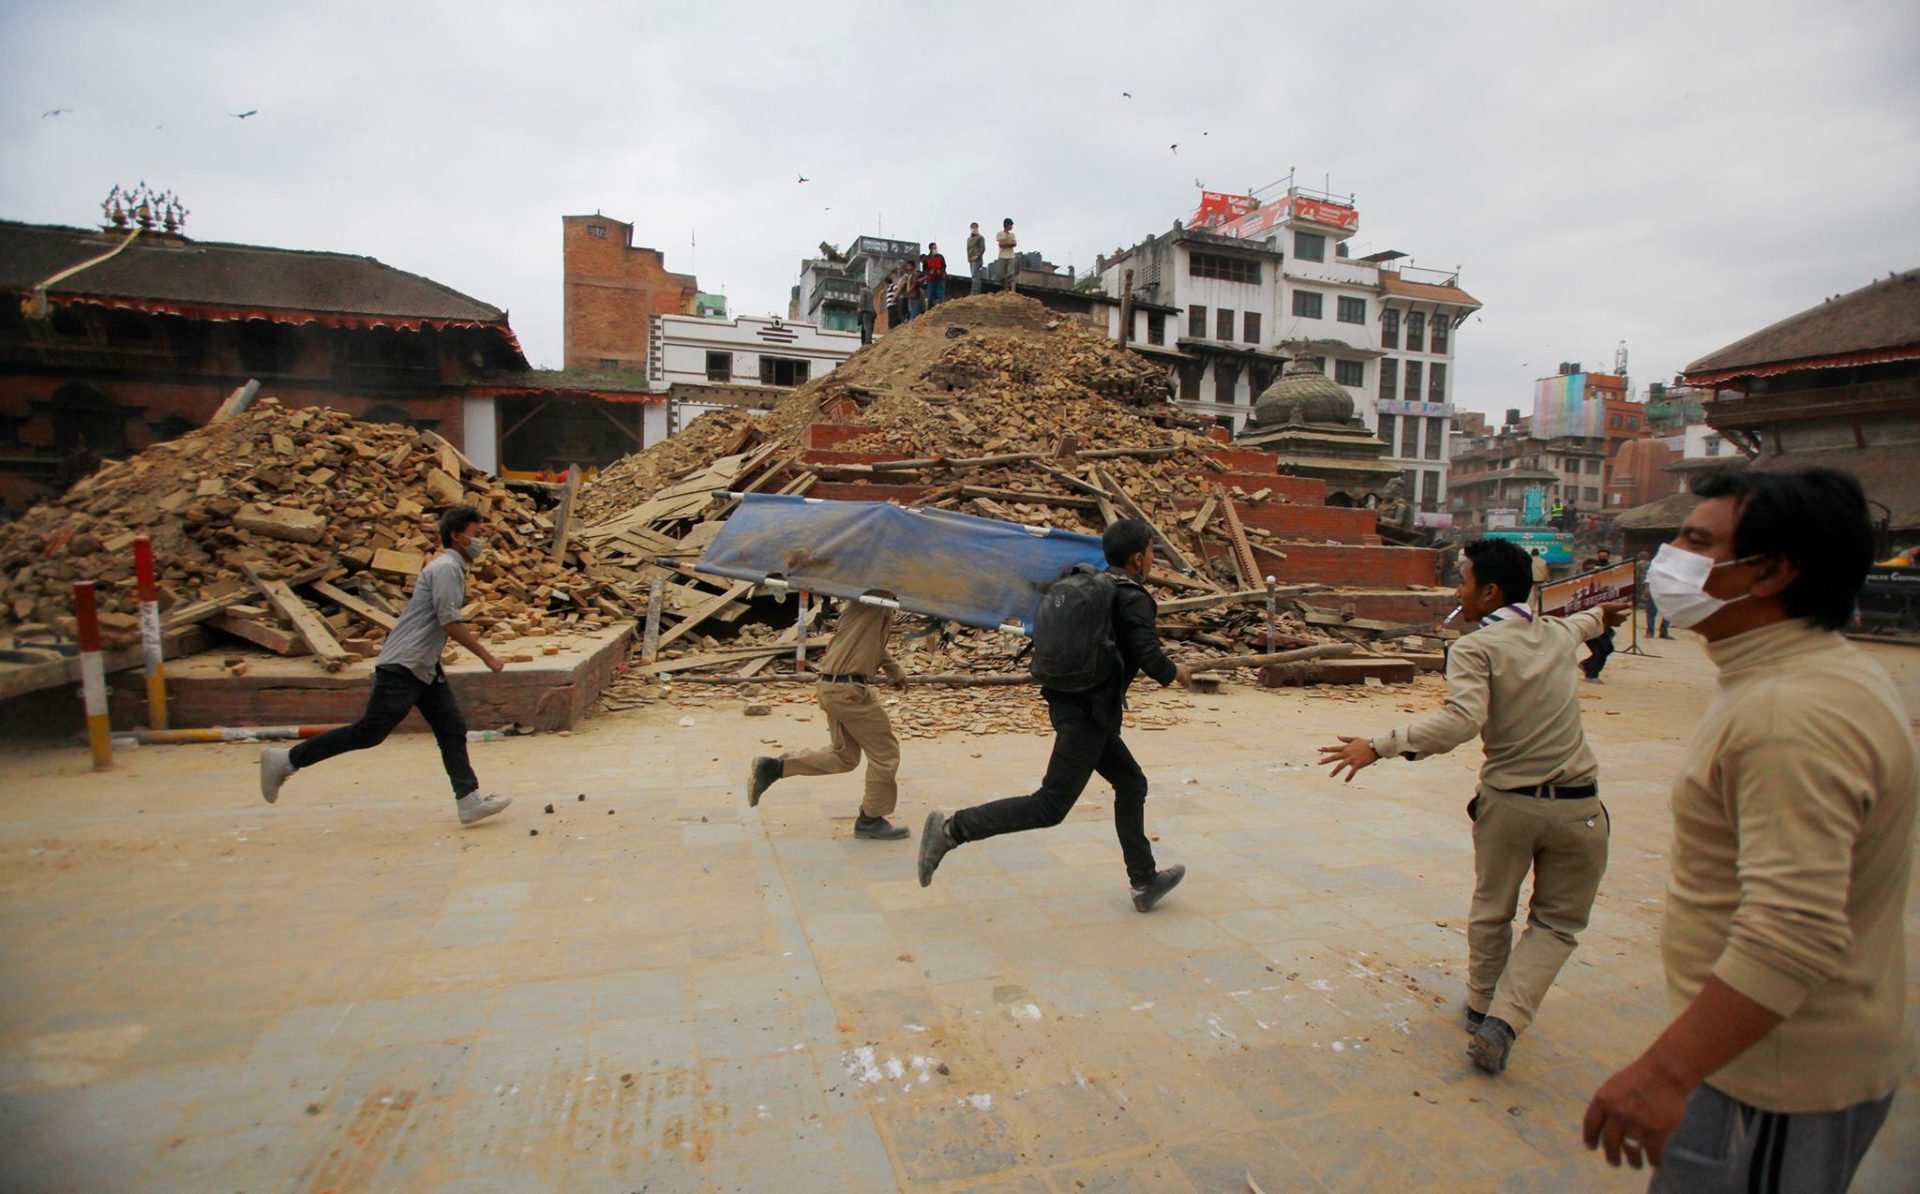 Rescuers rush to help victims of the devestating earthquake in Nepal - April 25, 2015